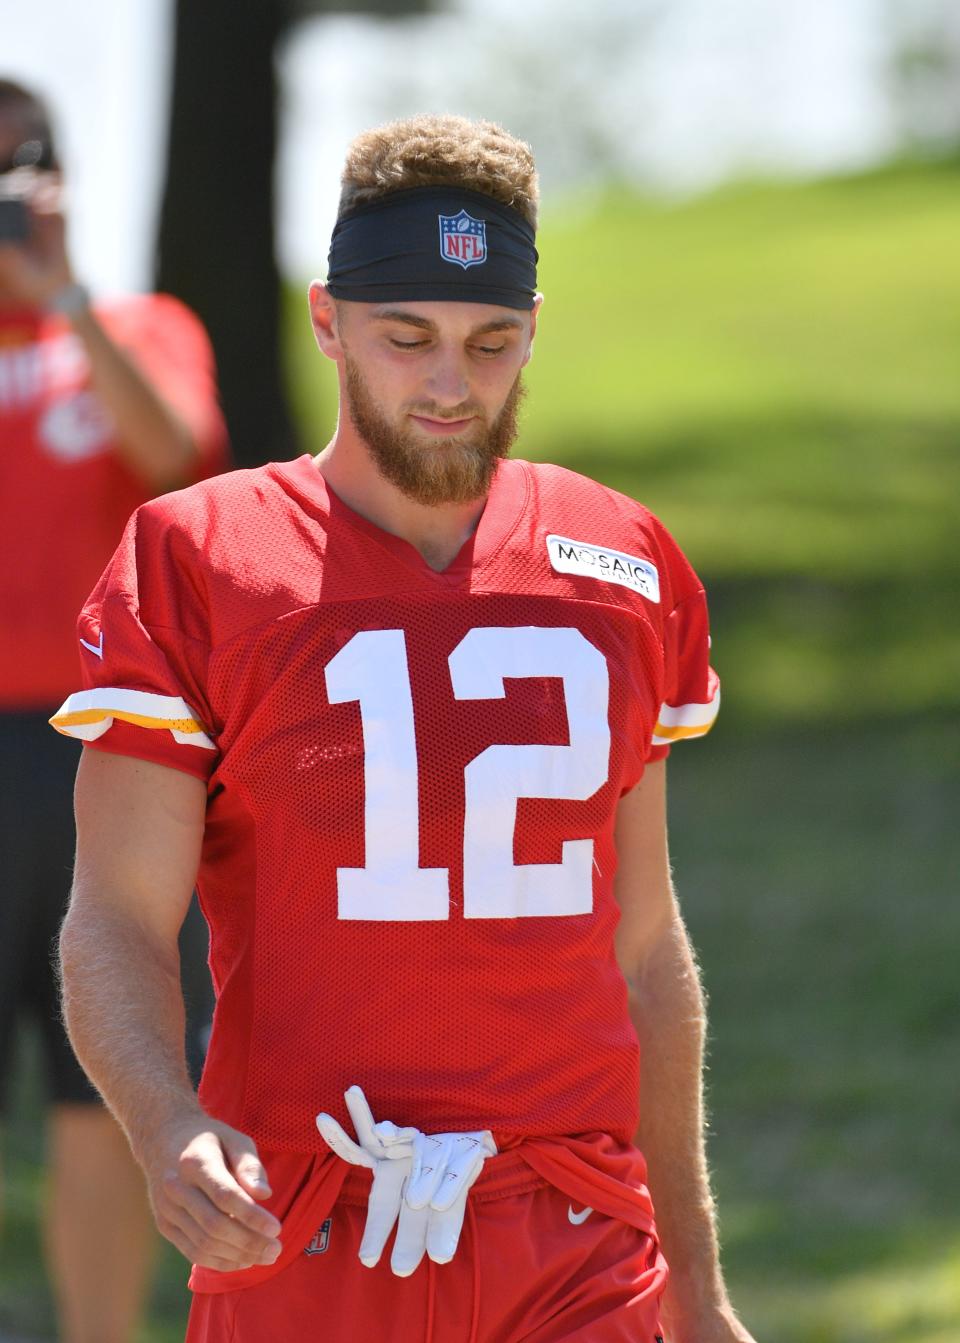 Kansas City Chiefs wide receiver Gehrig Dieter (12) walks to the field on July 27, 2019 during training camp at Missouri Western State University.